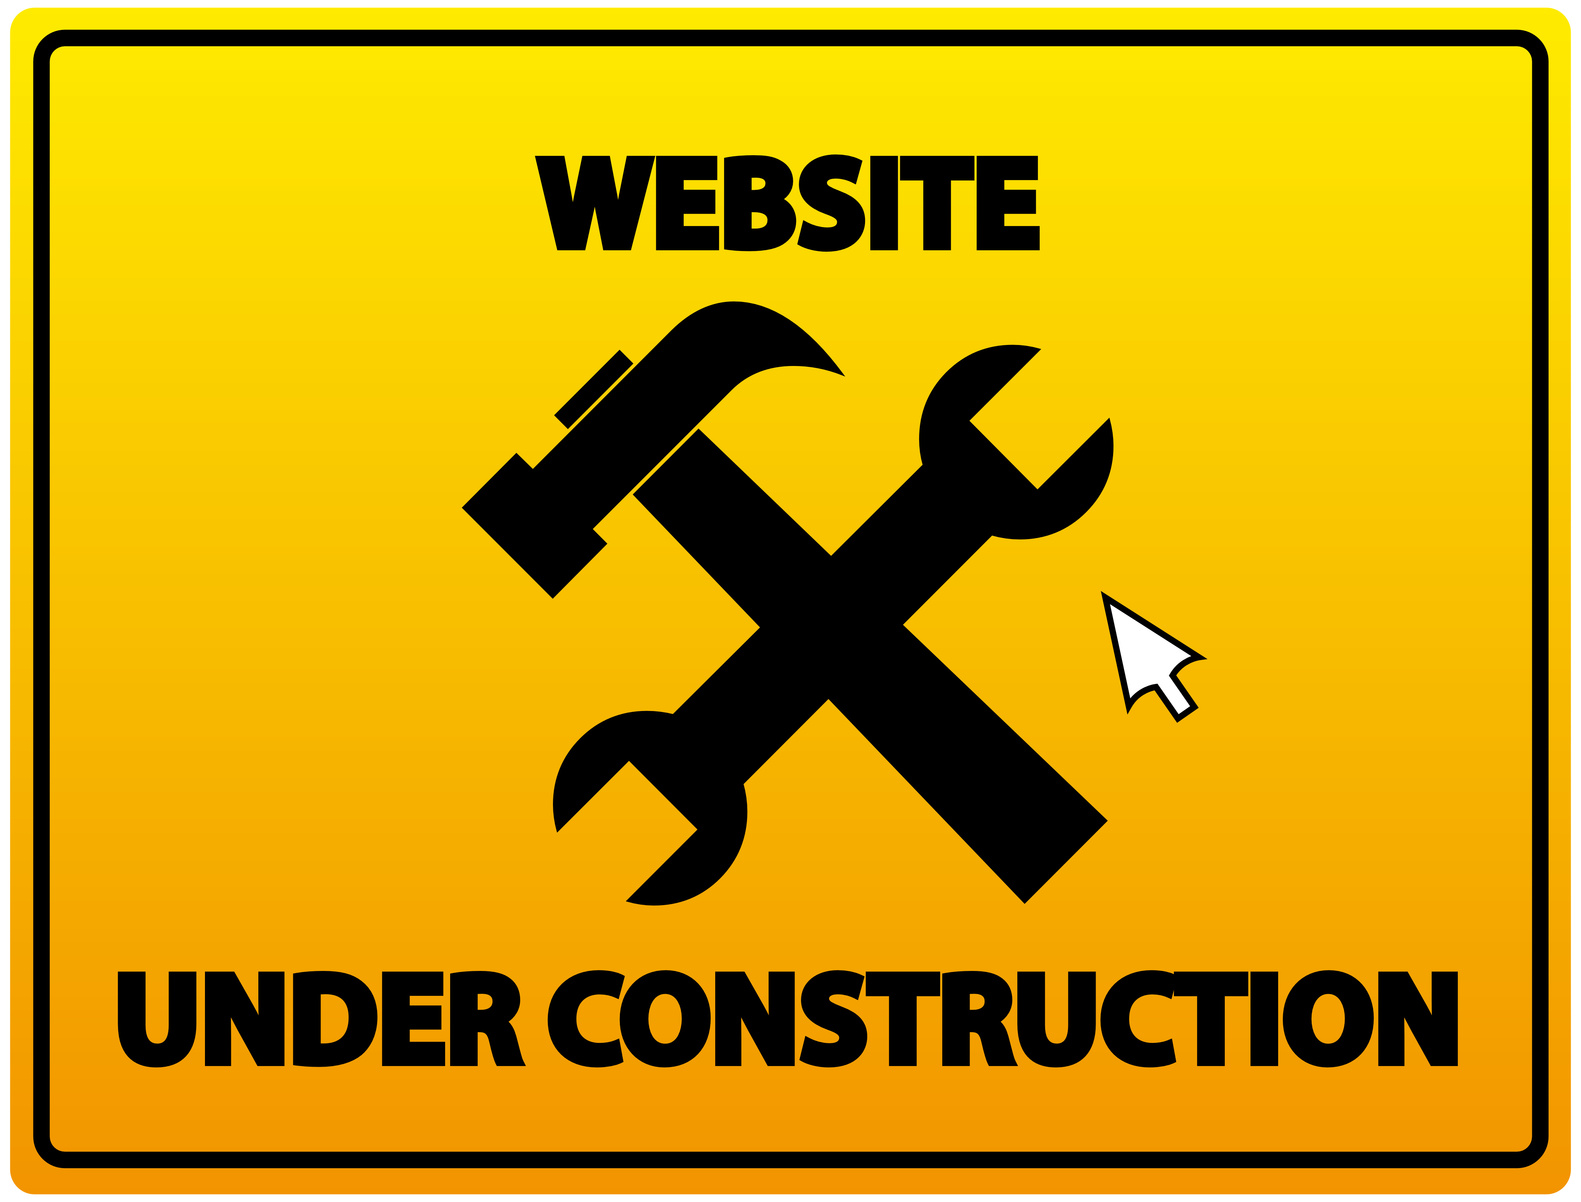 Website is currently under construction.